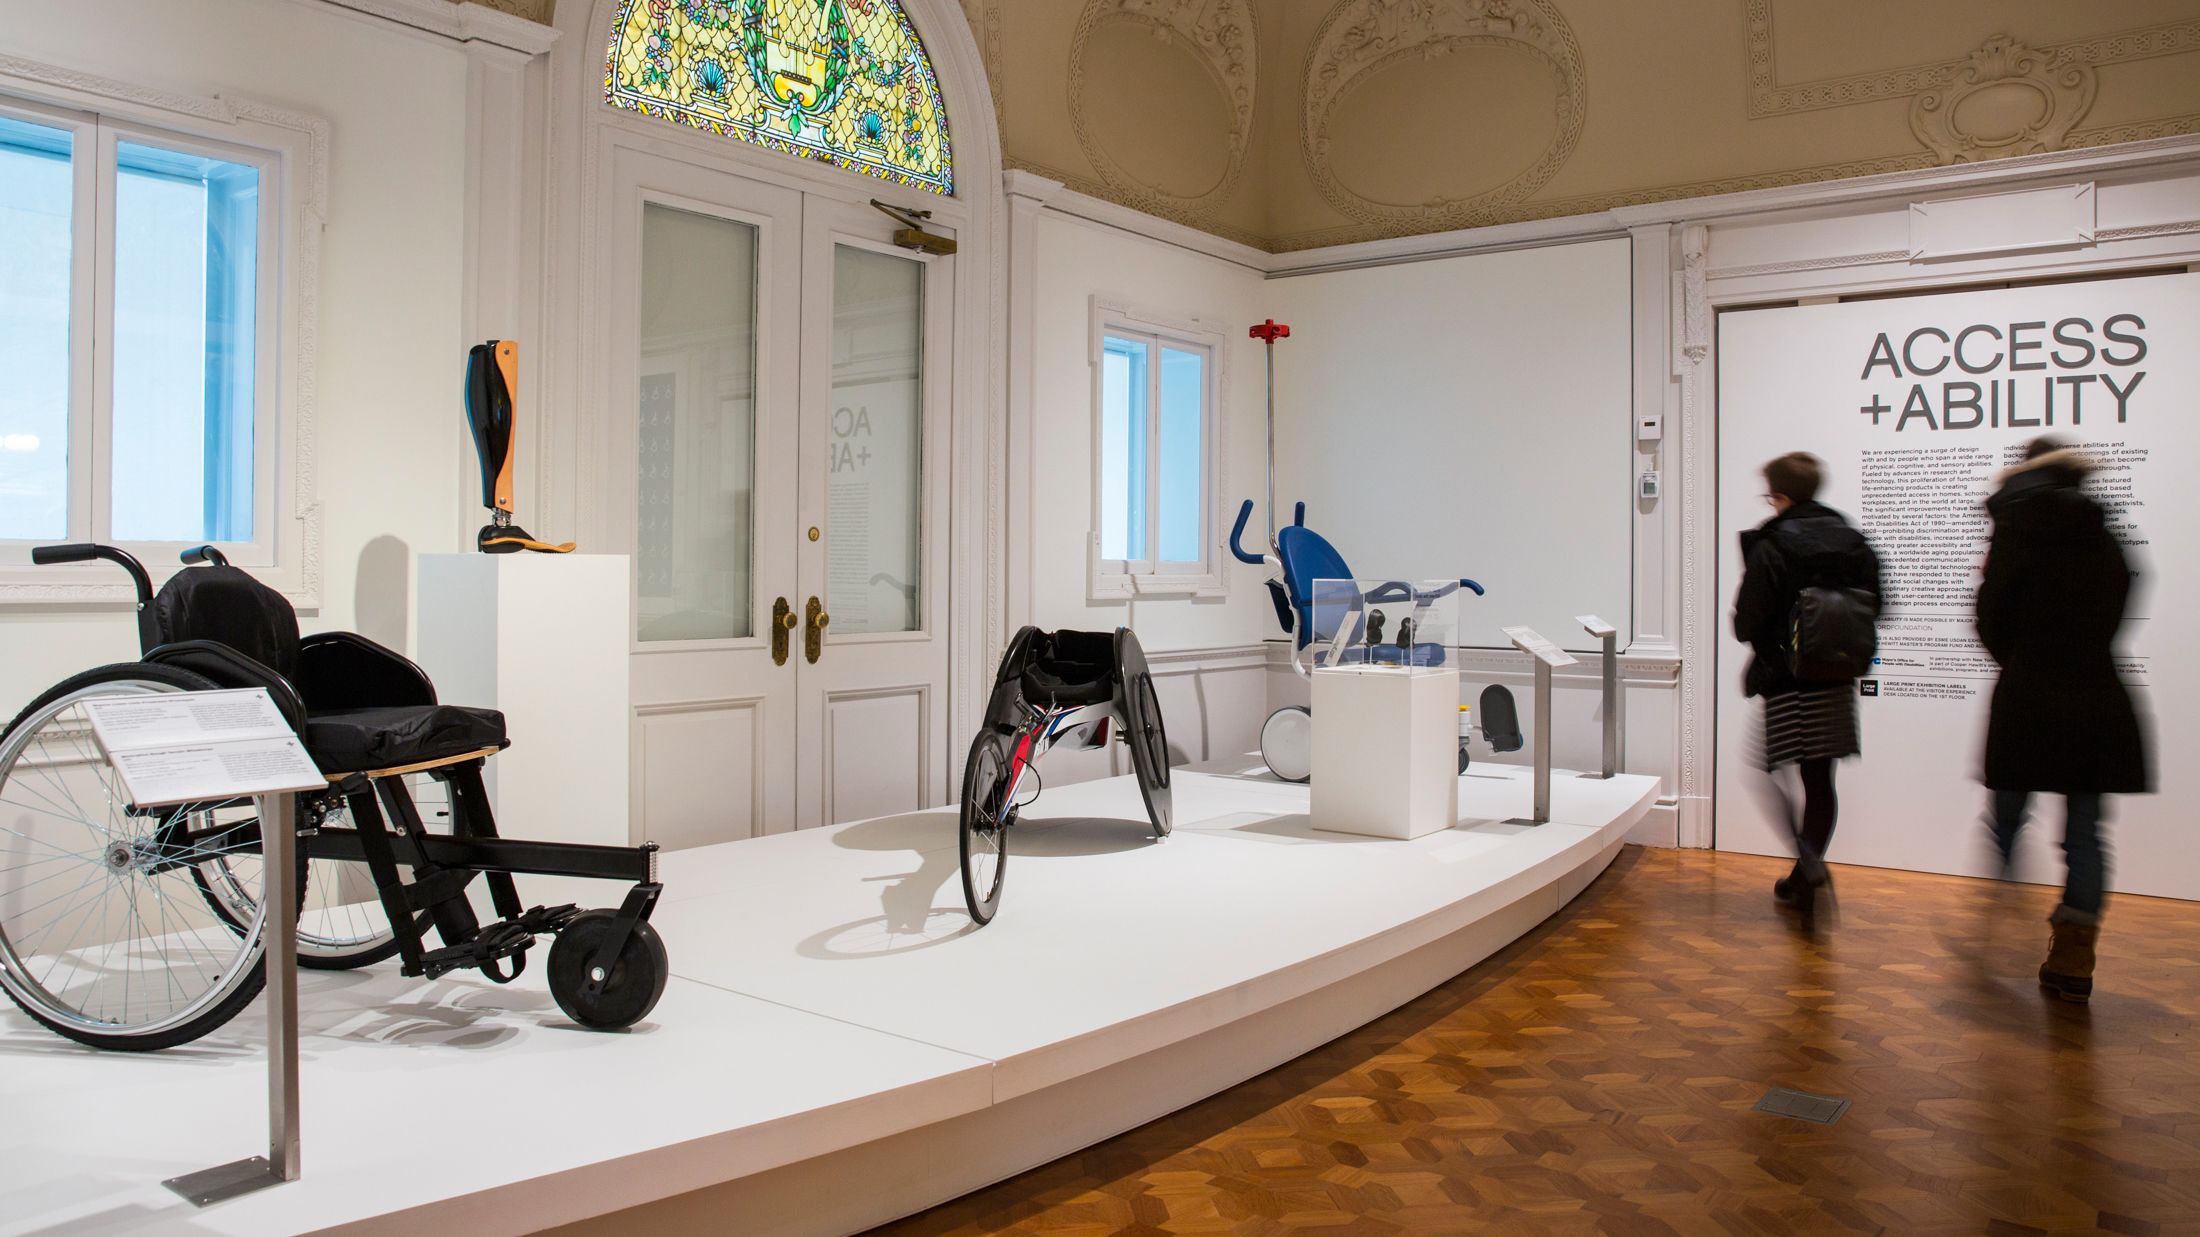 Access+Ability' exhibit showcases designs for, and by, those with disabilities | CNN